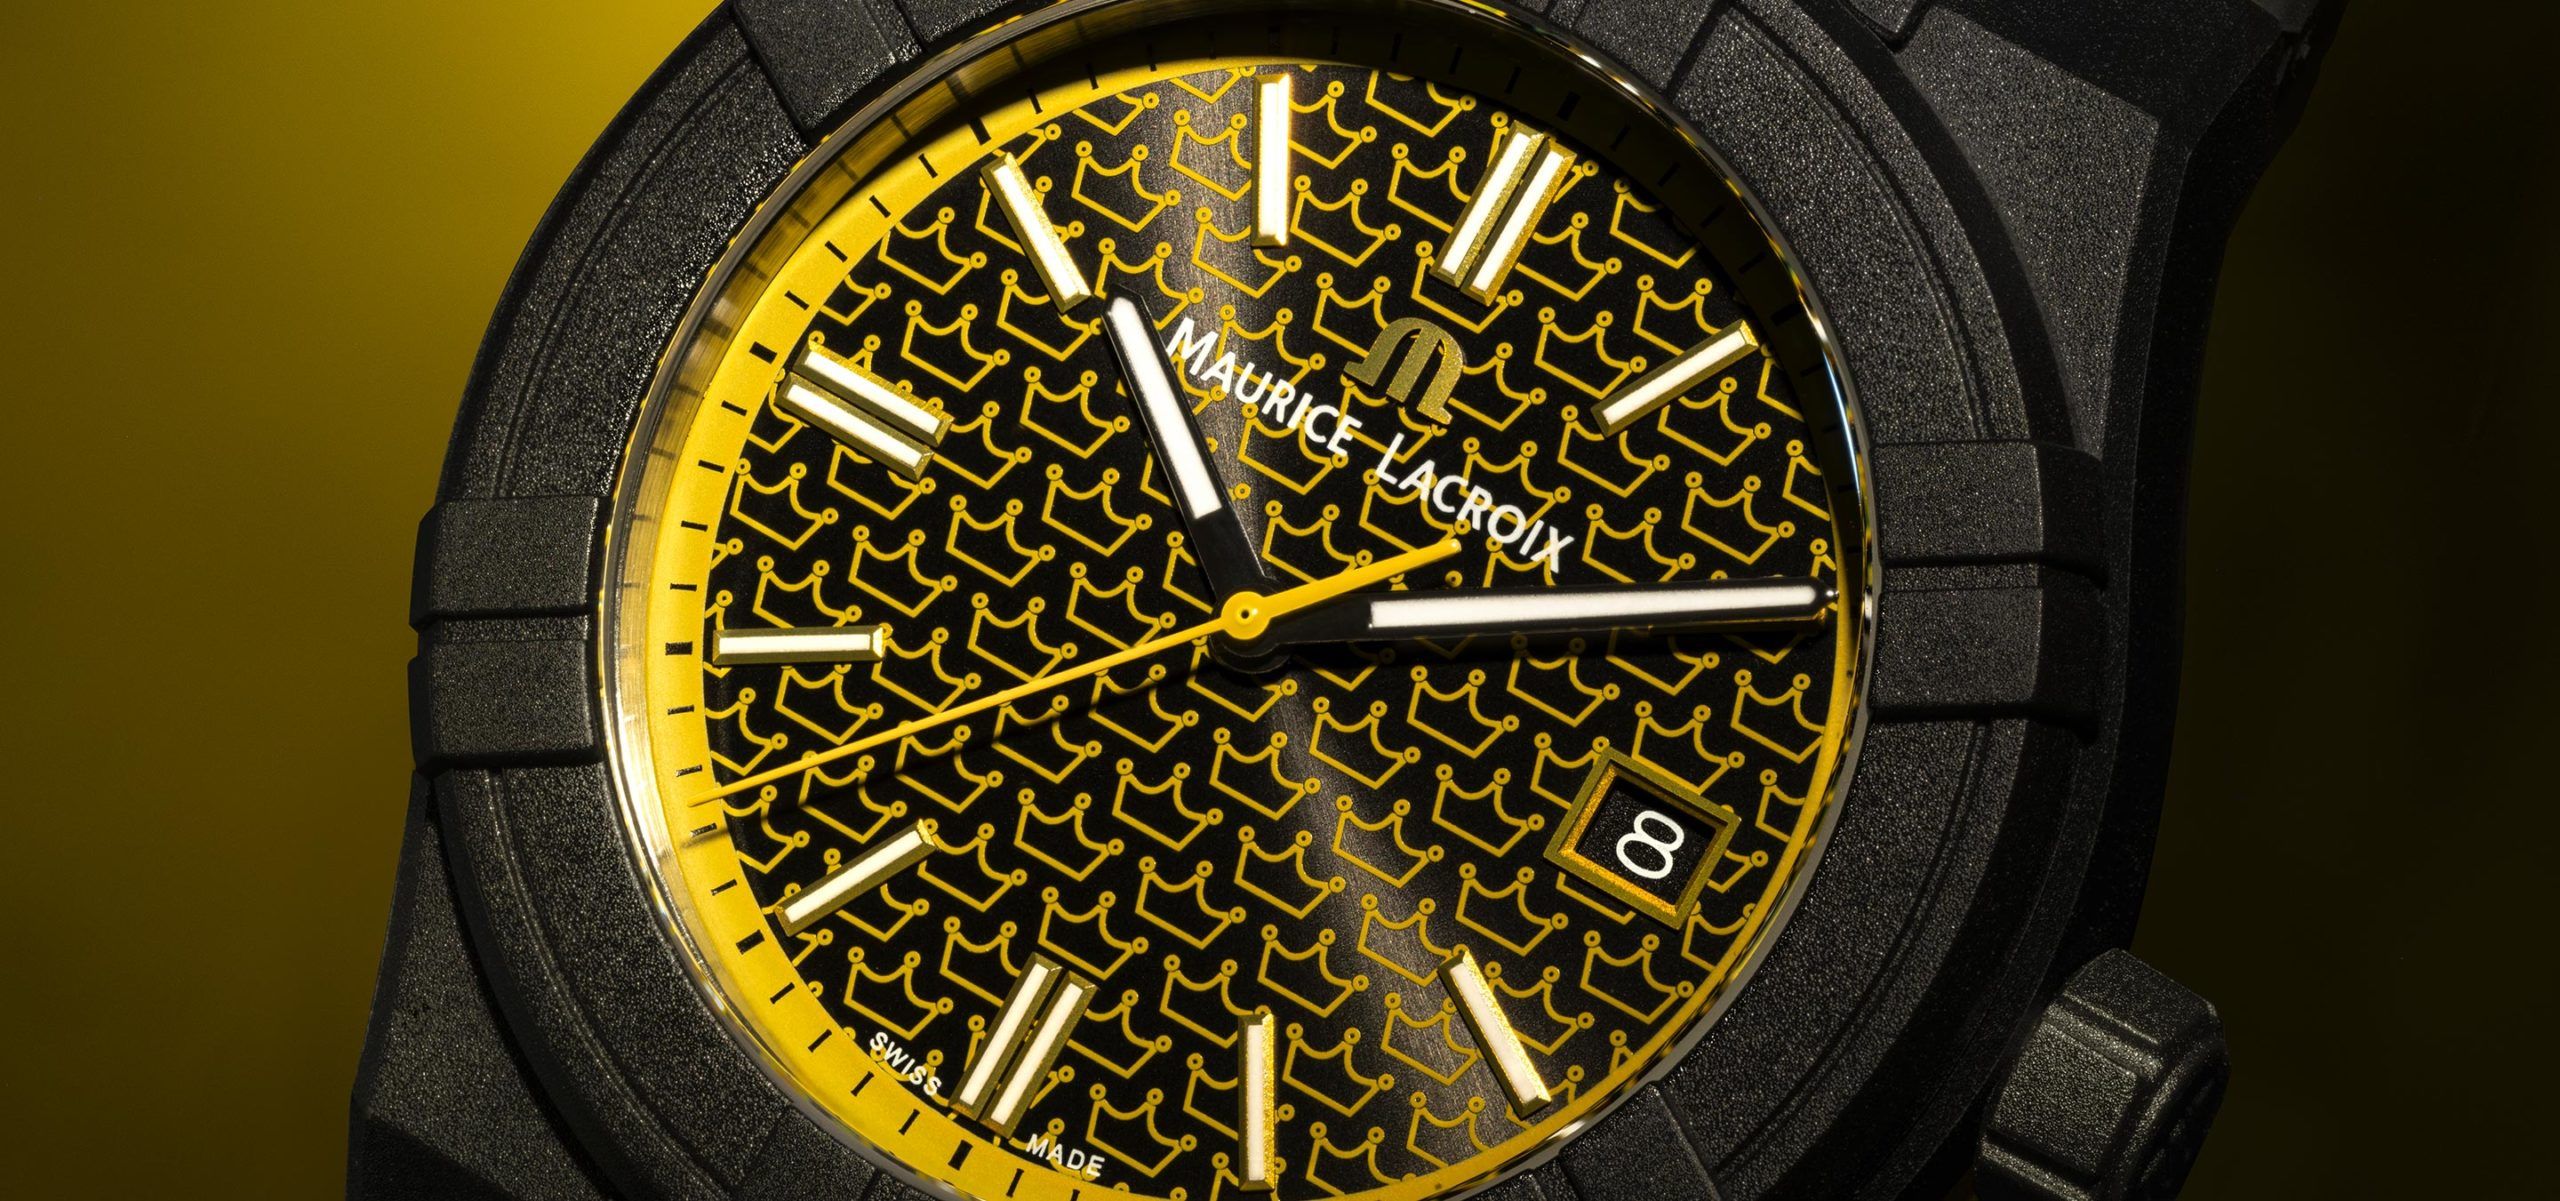 Long Live The King: Introducing The Maurice Lacroix Aikon #Tide KOTC timepiece